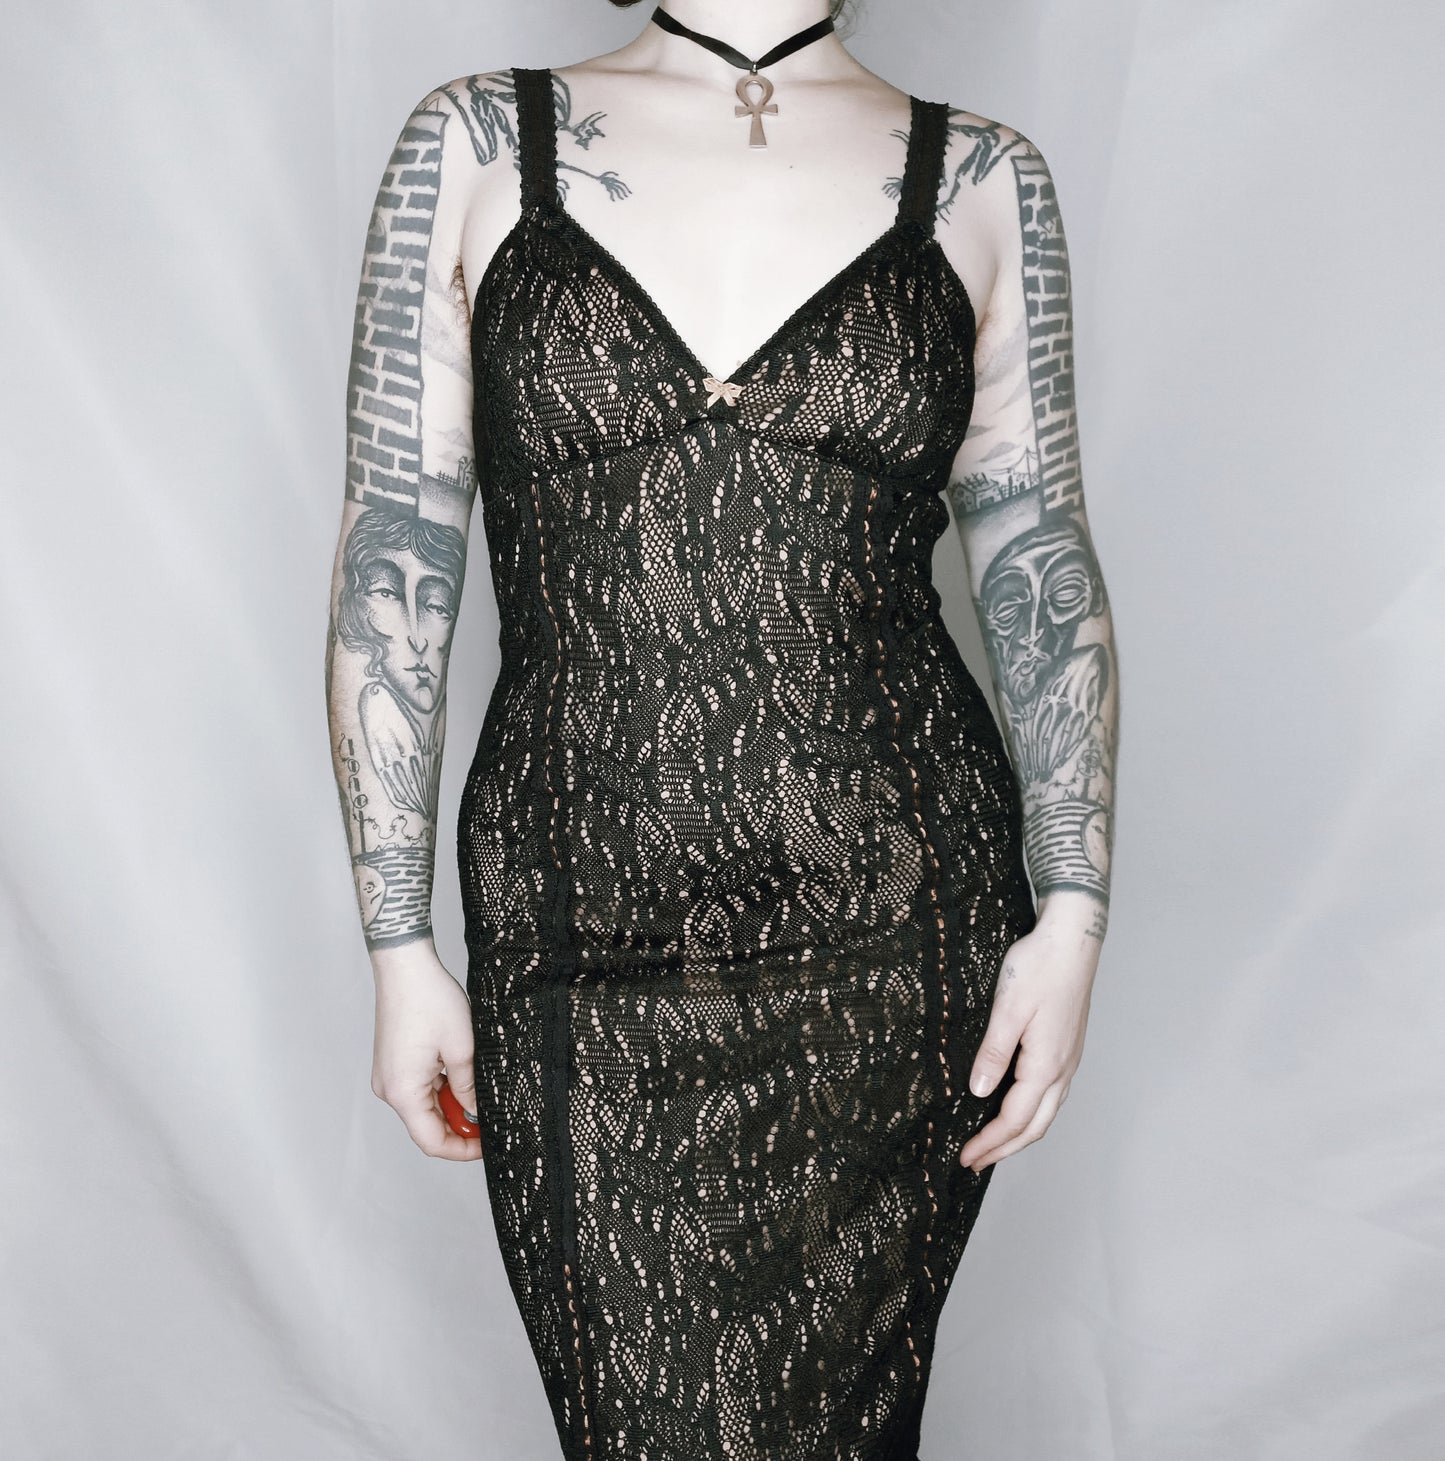 Lined Lingerie-Style Lace Dress - S/M